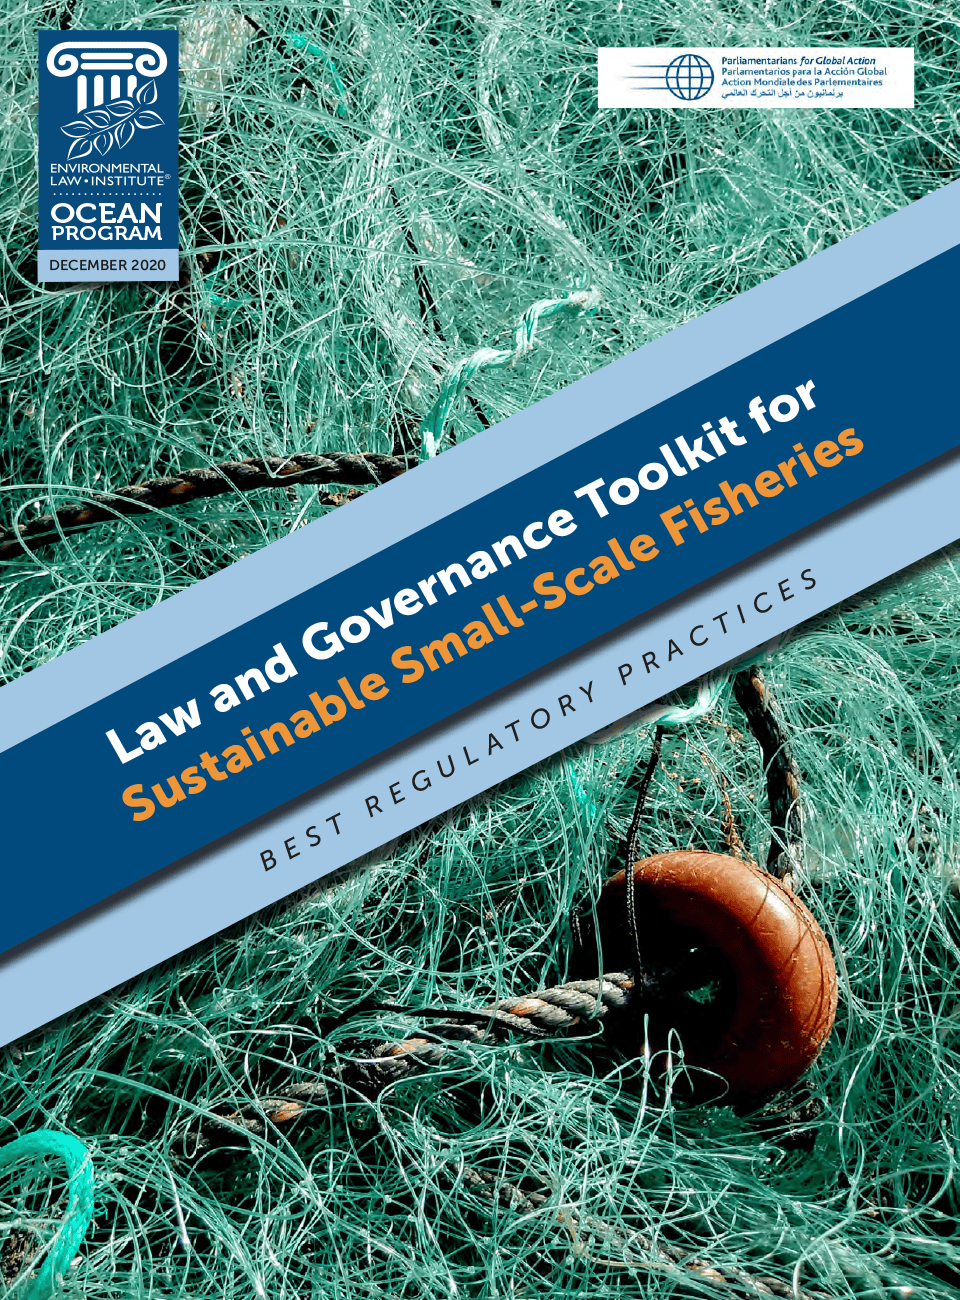 Law and Governance Toolkit for Sustainable Small-Scale Fisheries: Best Regulatory Practices